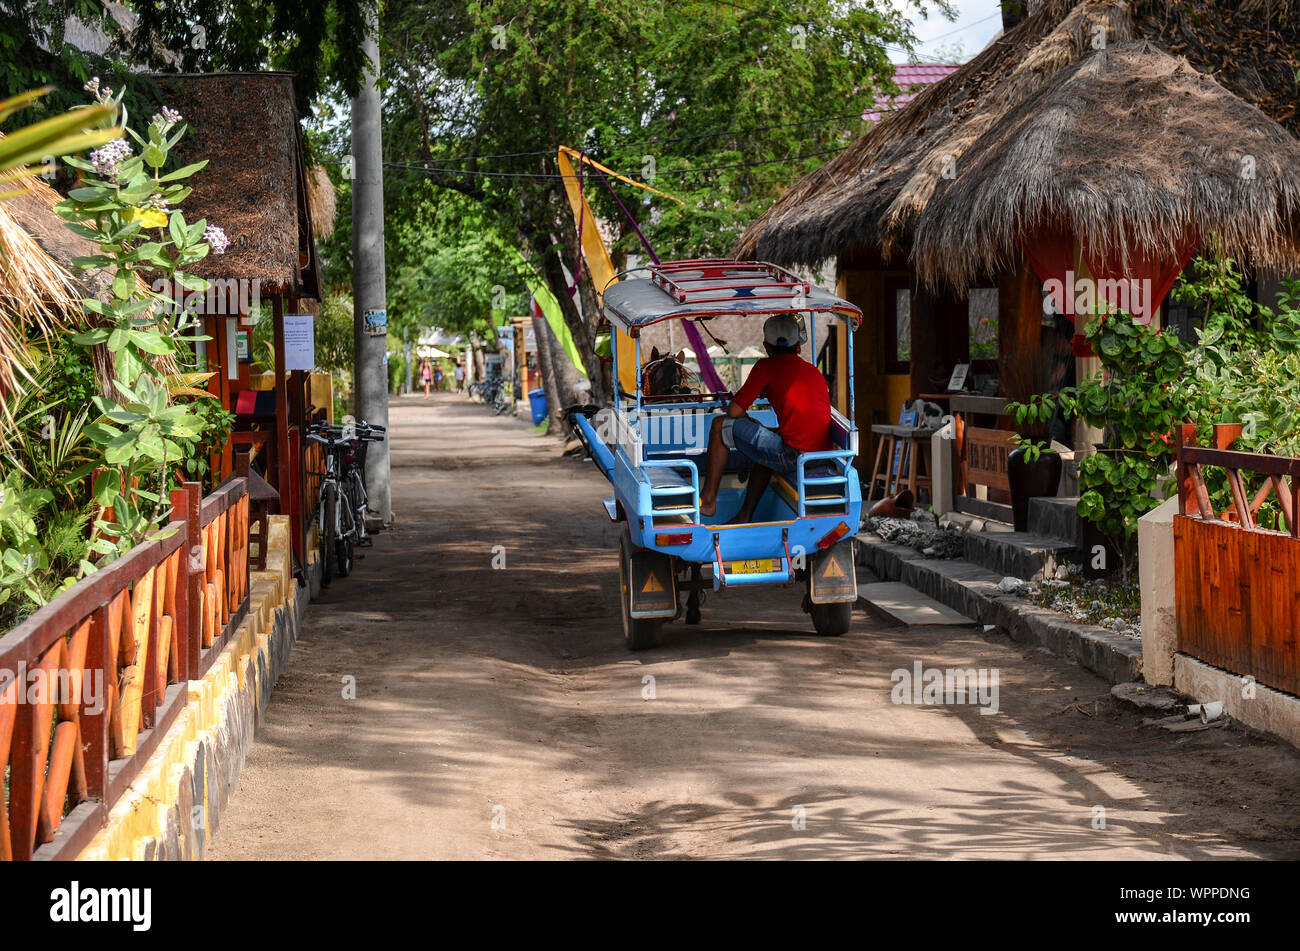 GILI AIR, LOMBOK / INDONESIA -MAY 30, 2014: traditional horse carriage in Gili Air Island. No motorized vehicles are allowed on the island. Stock Photo